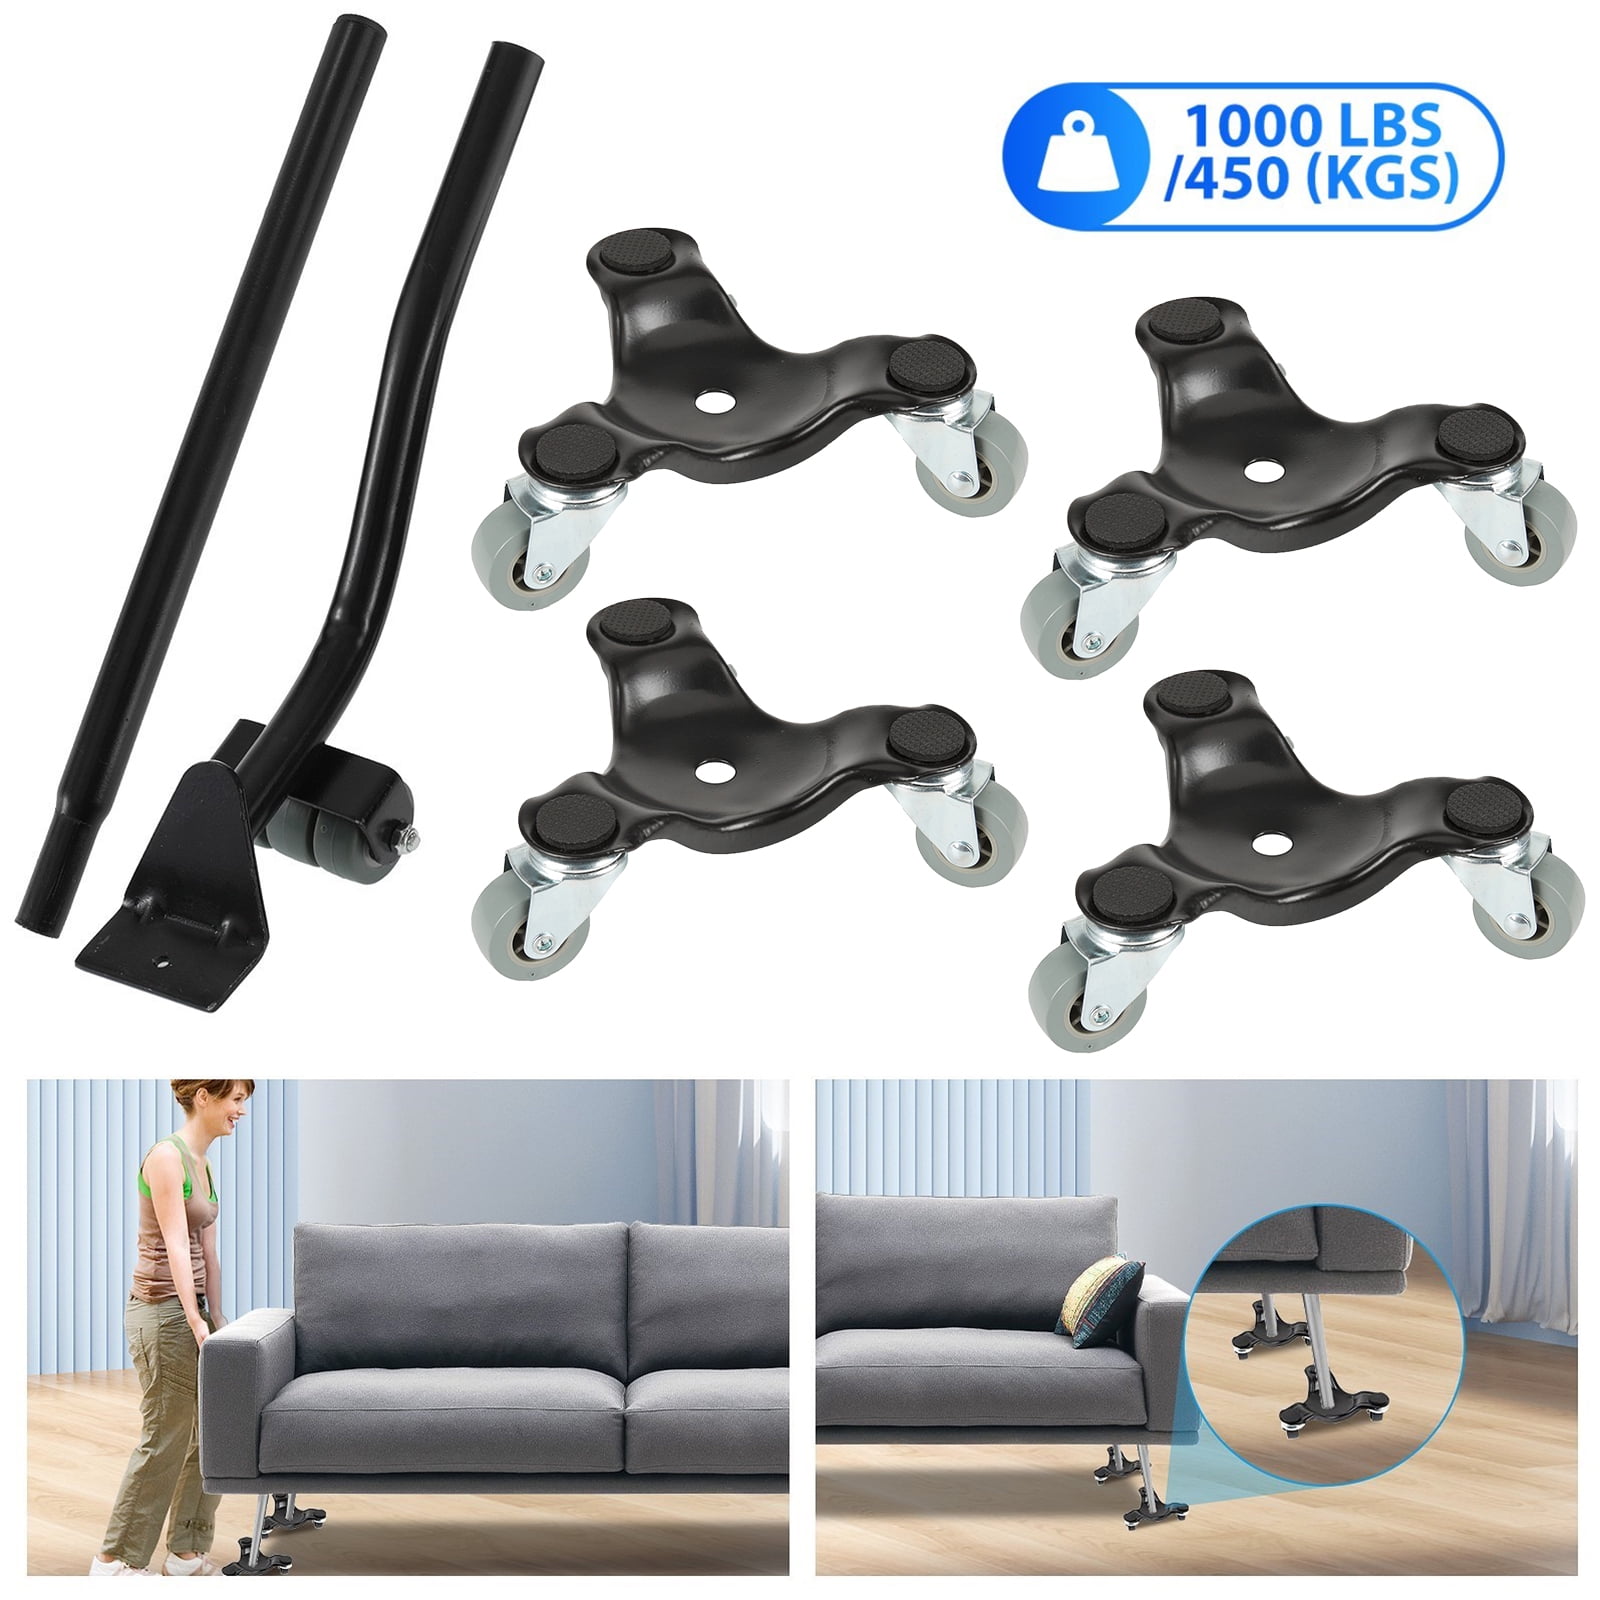 400kg Heavy Duty Furniture Transport Mover Sliders Wheel Easy Furniture Mover Tool Set Wheel Roller Tools, Men's, Size: One size, Black